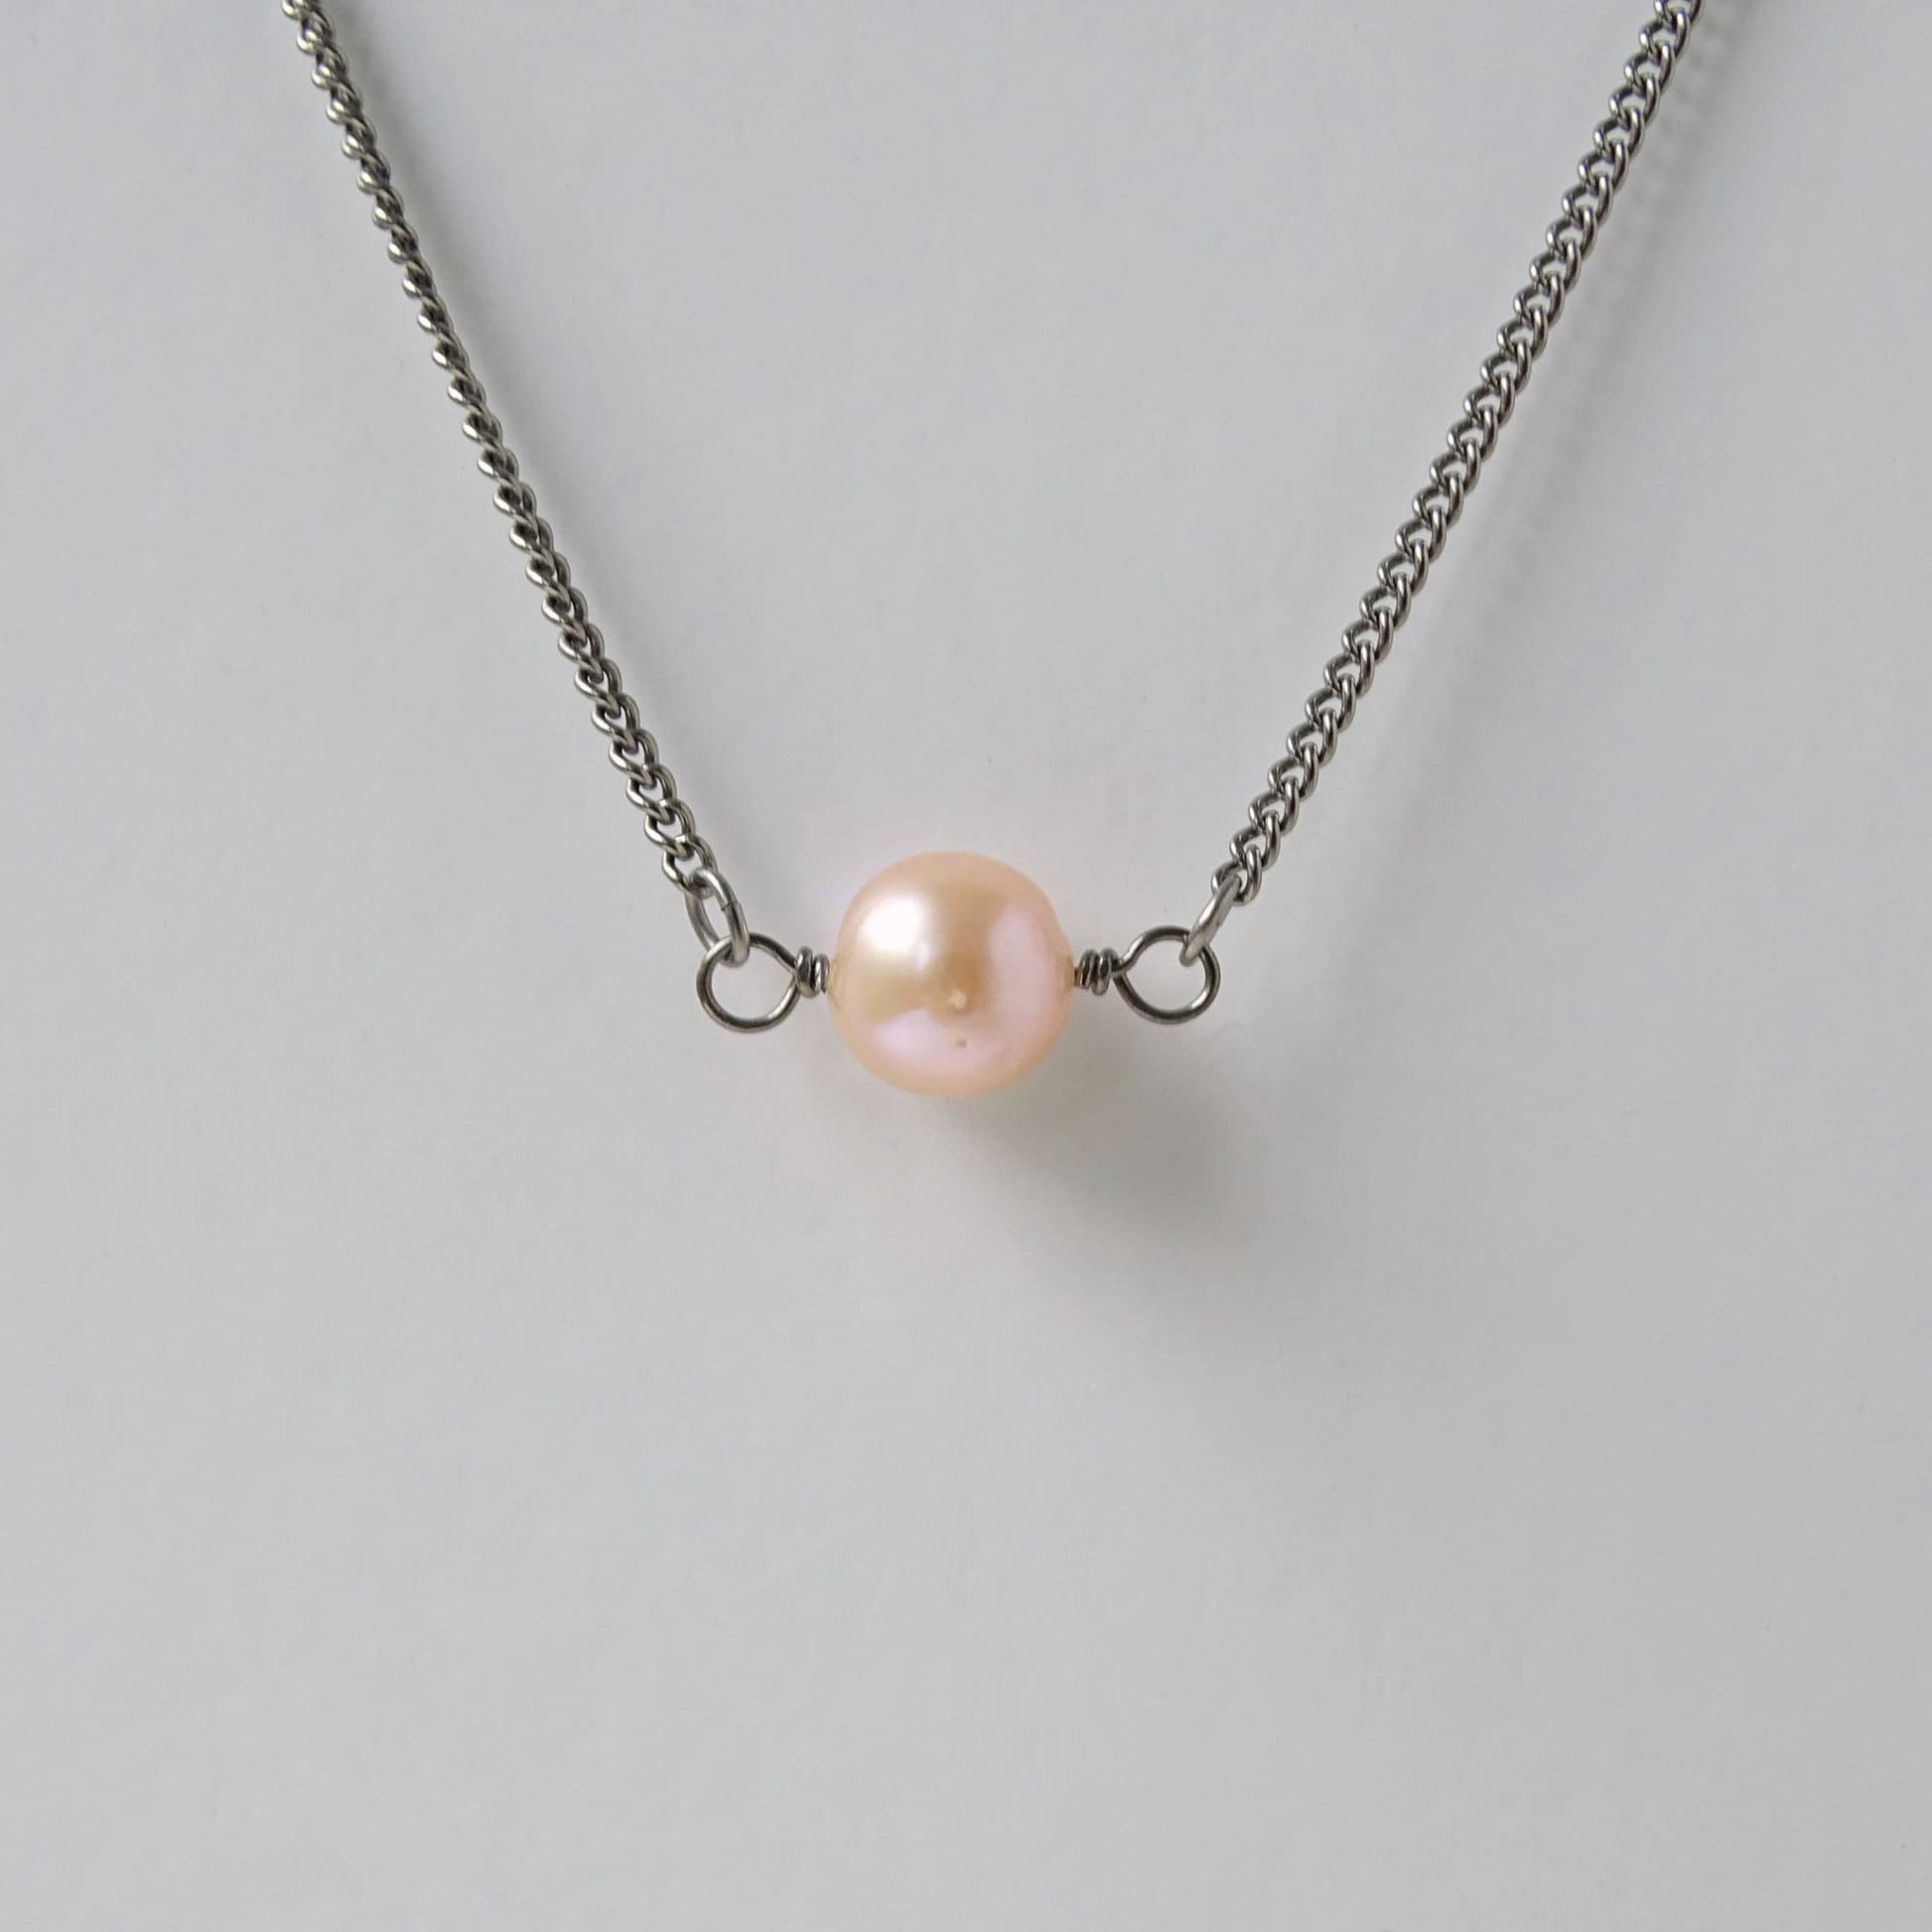 Single Pink Pearl Titanium Necklace, Niobium Wire Wrapped Freshwater Pearl, Nickel Free Necklace for Sensitive Skin, Hypoallergenic Jewelry